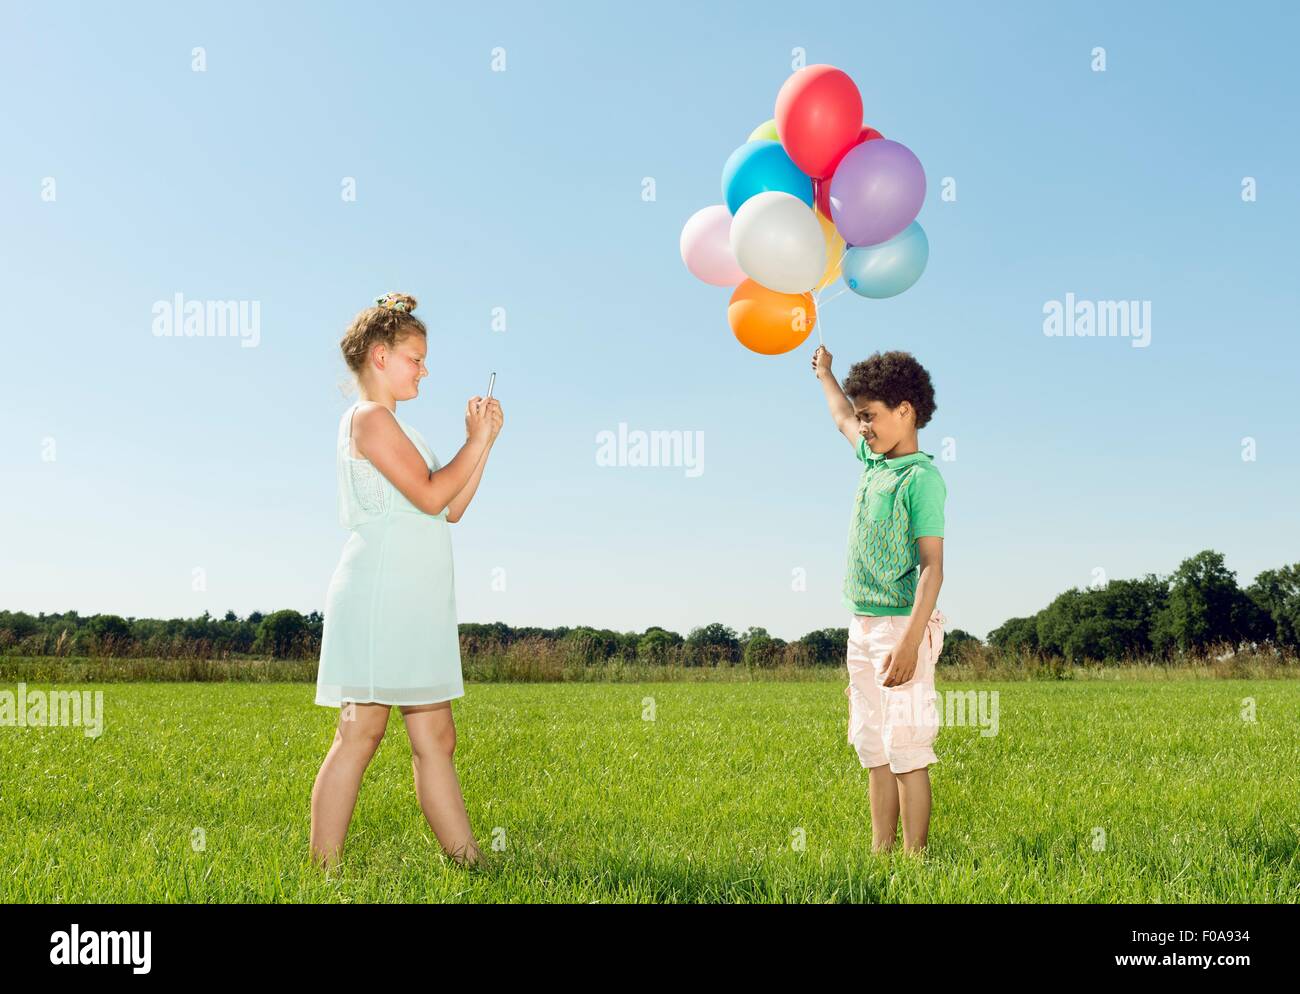 Girl taking smartphone photograph of boy holding bunch of balloons in field Stock Photo